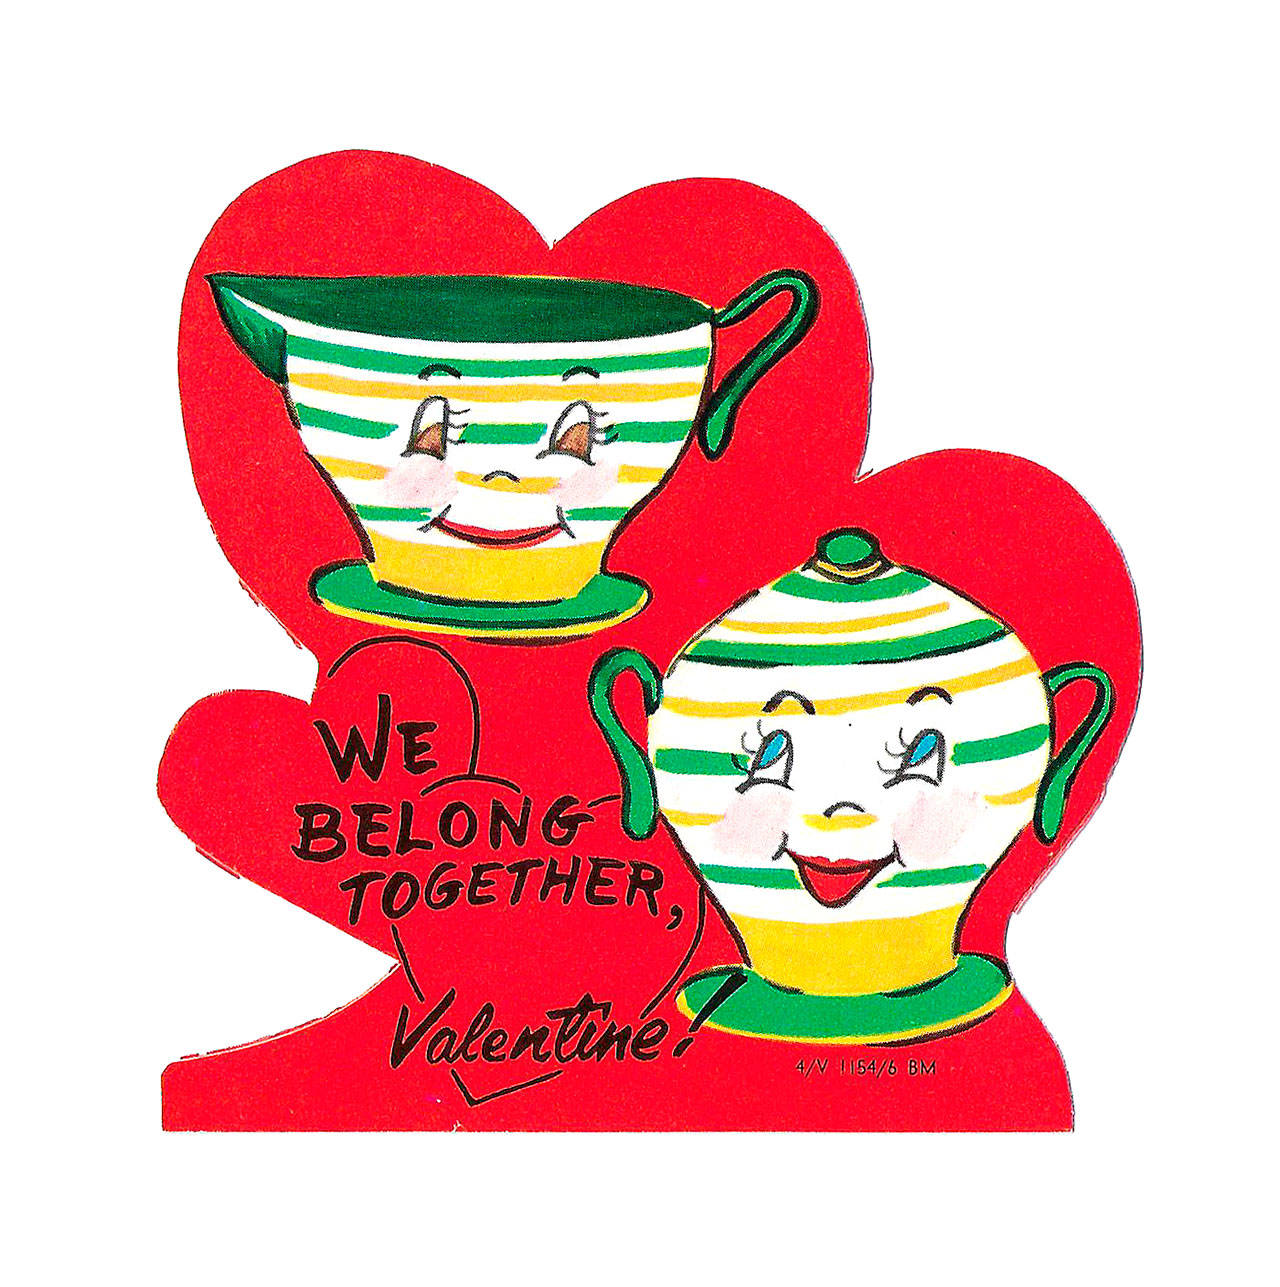 This 1950s cutout card picturing a cup and saucer and the message “We belong together” sold this year for 50 cents. (Cowles Syndicate Inc.)